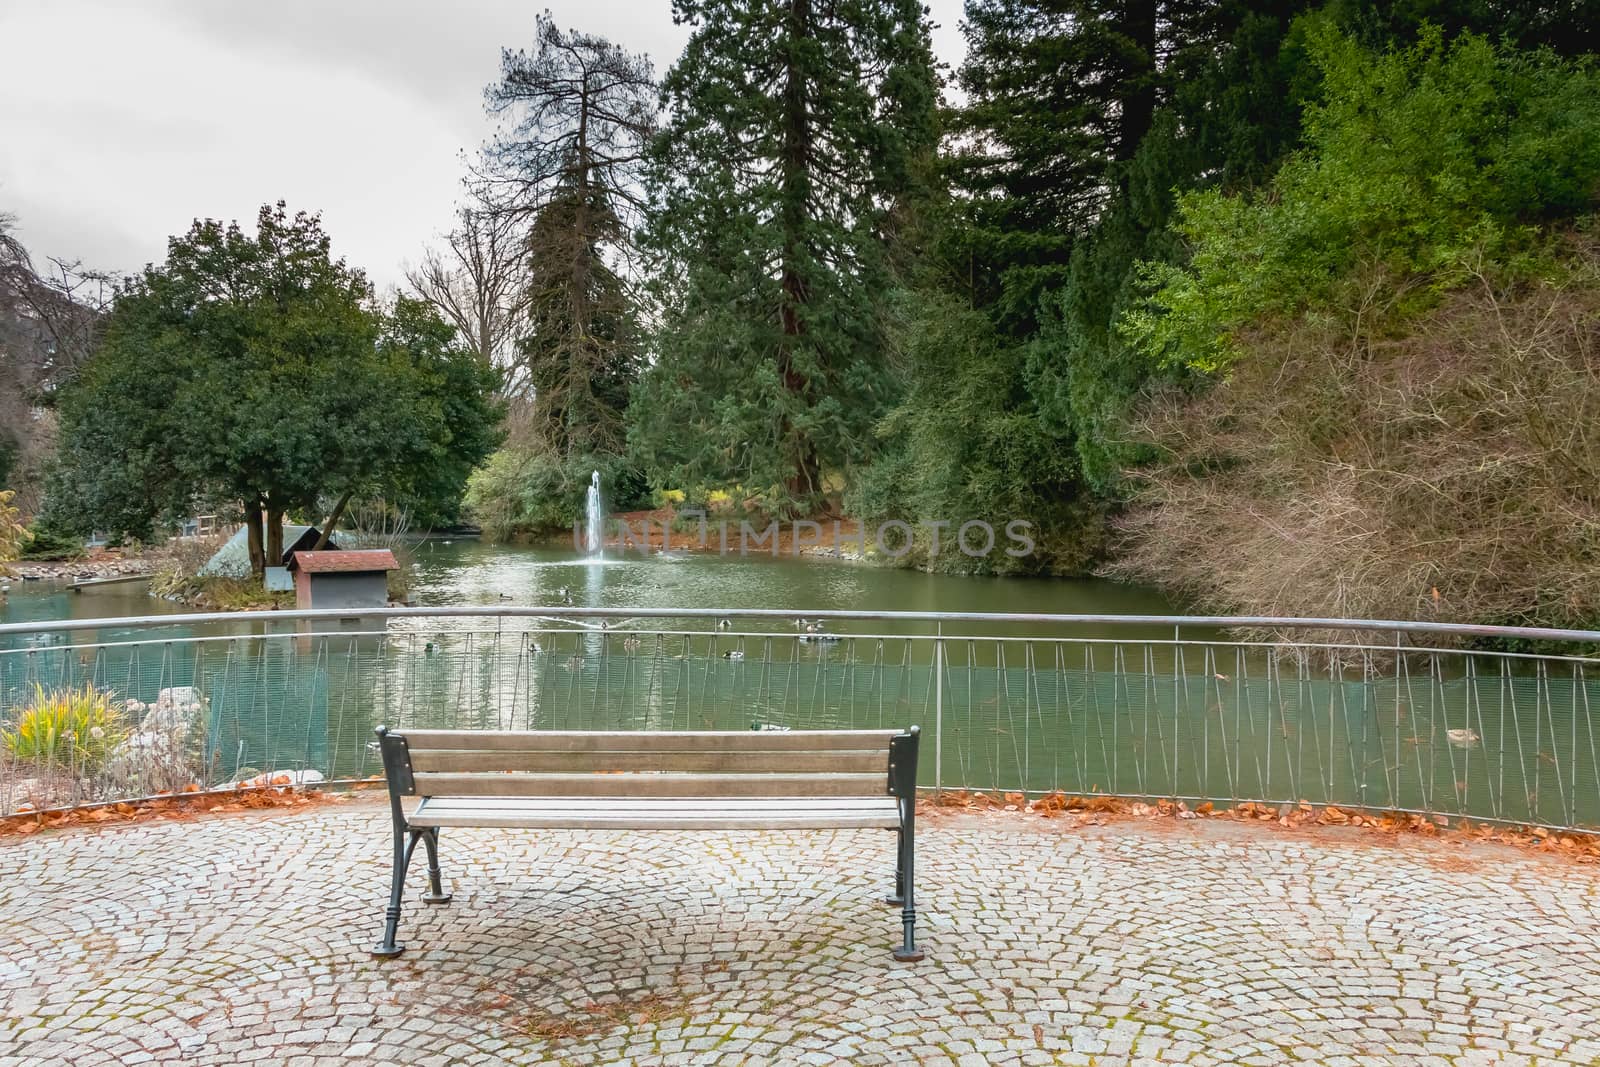 peaceful atmosphere around a small pond with ducks and bench by AtlanticEUROSTOXX